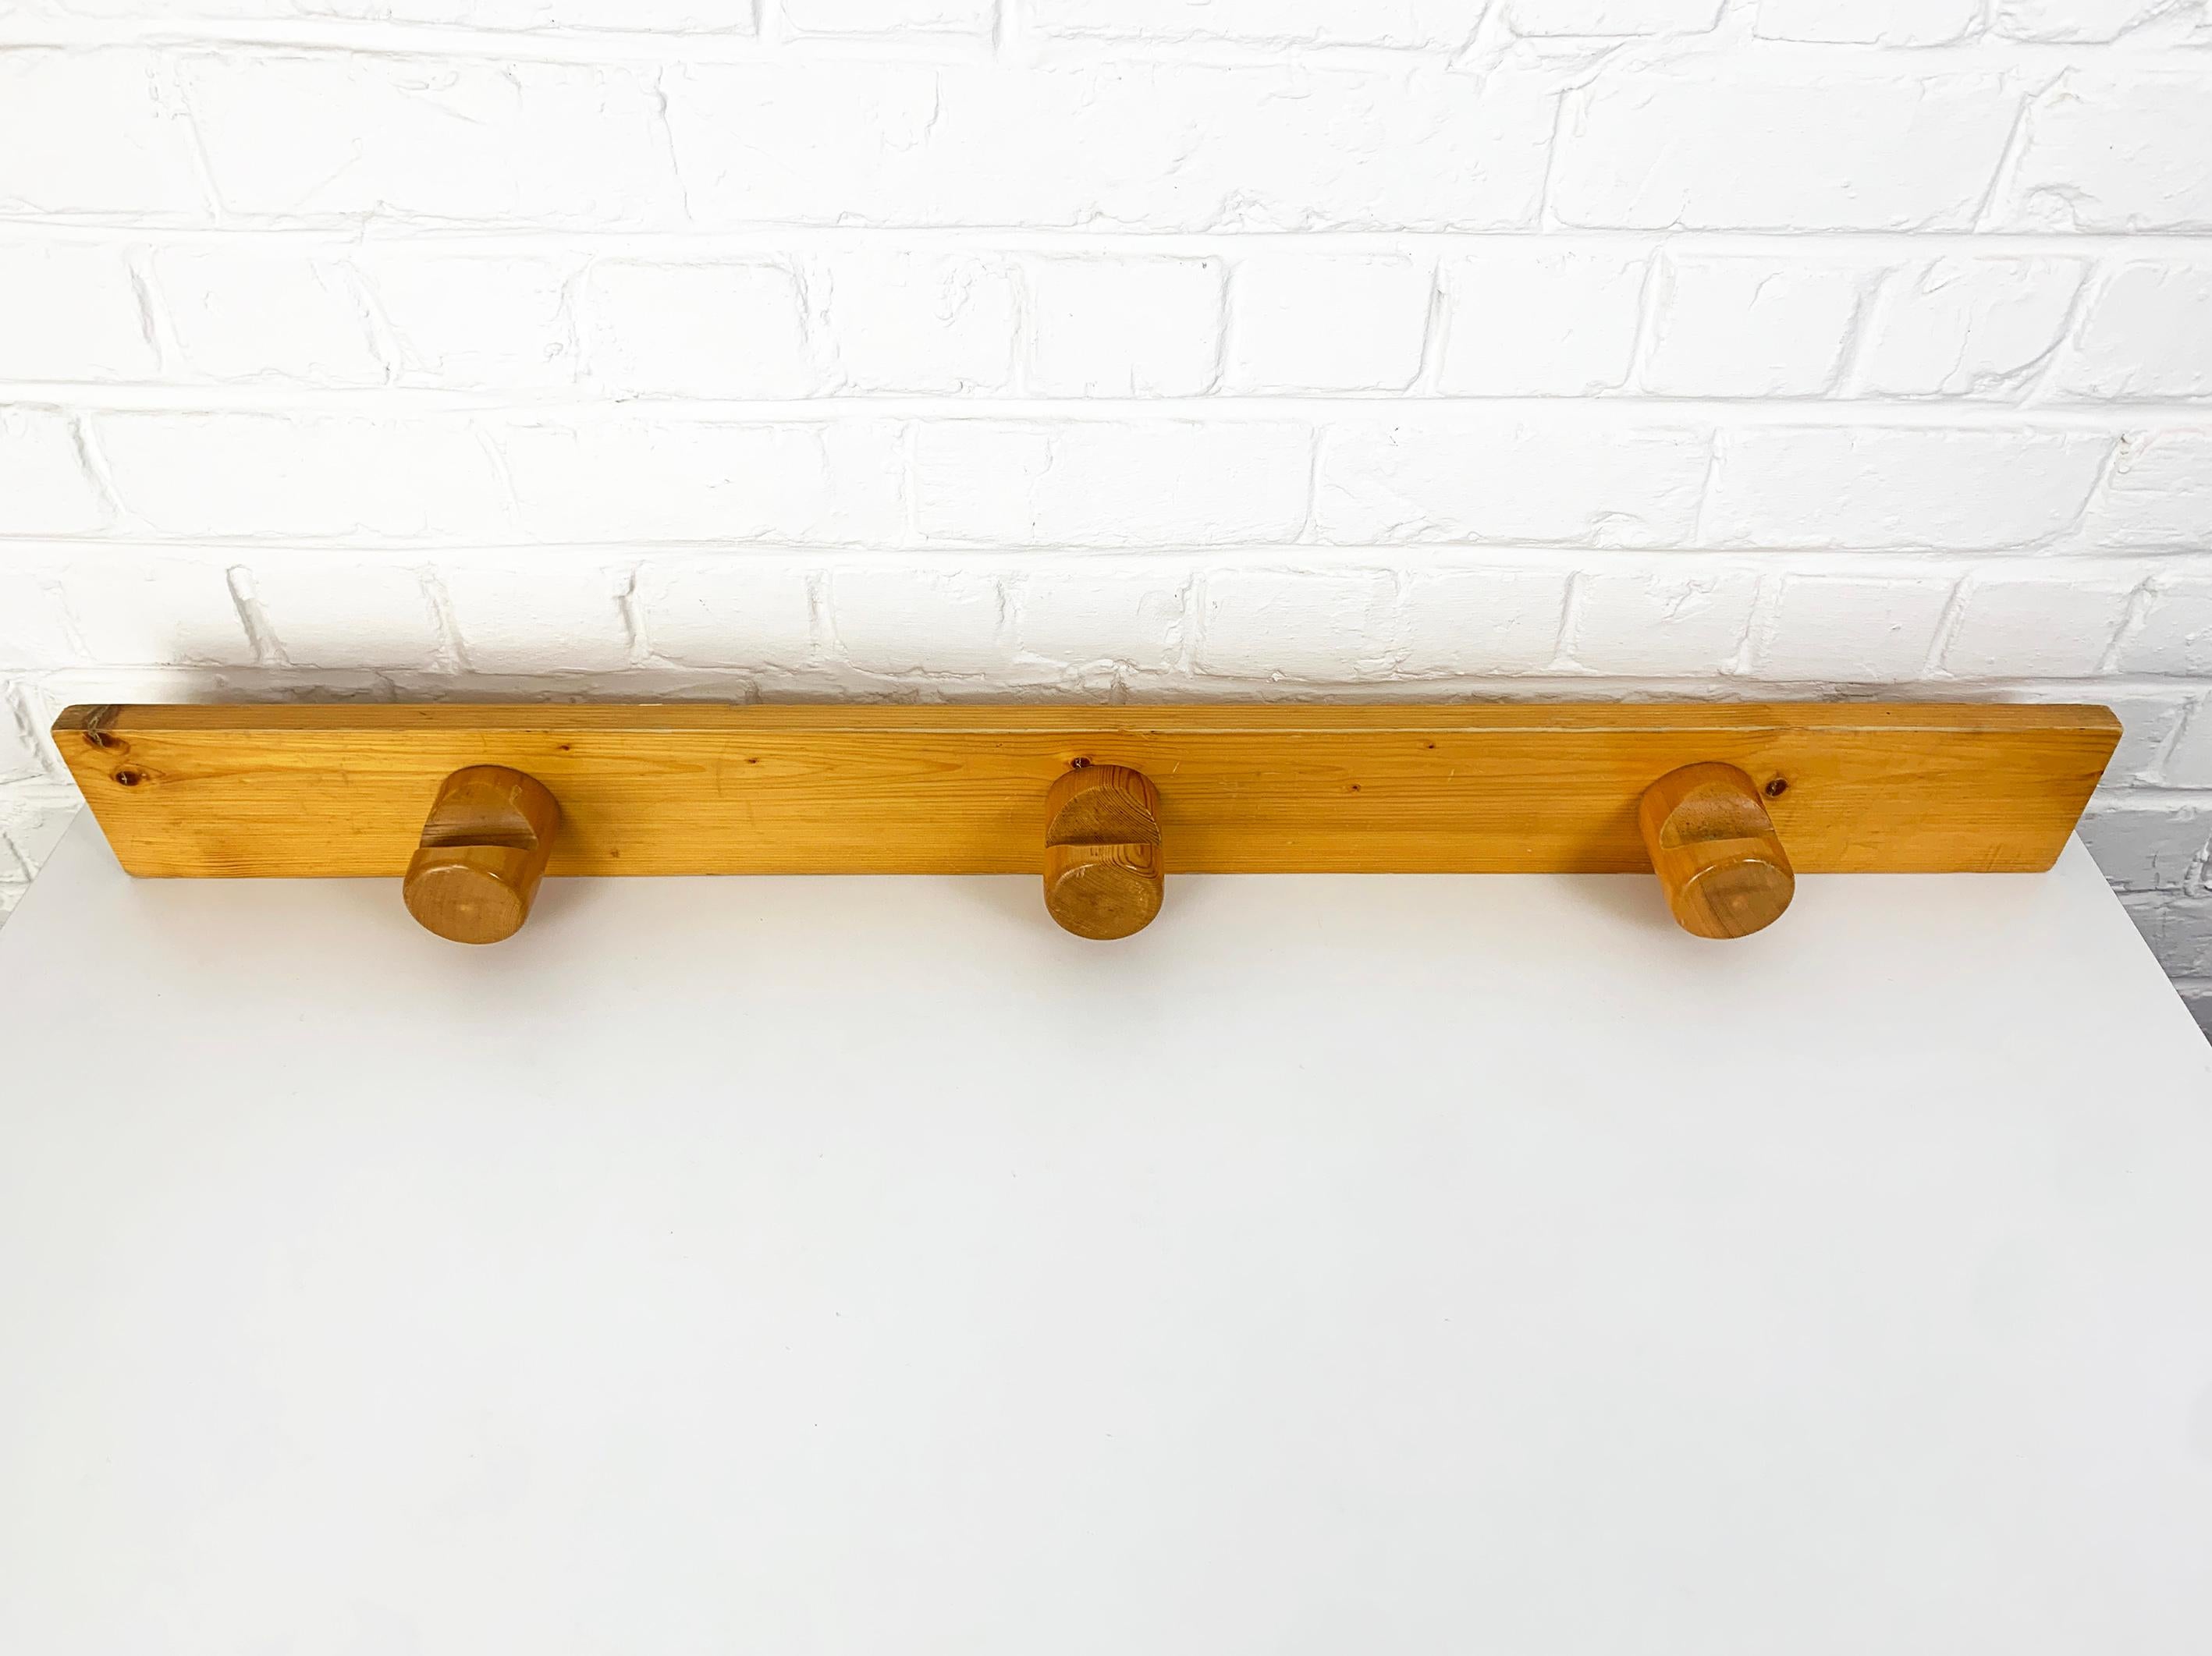 Coat rack with three hangers designed by Charlotte Perriand for Les Arcs, a ski resort in the Alps. 

The project was one of the largest in Perriand's career. She was then in her 60s, at the peak of her career in 1967 when she was asked to join the